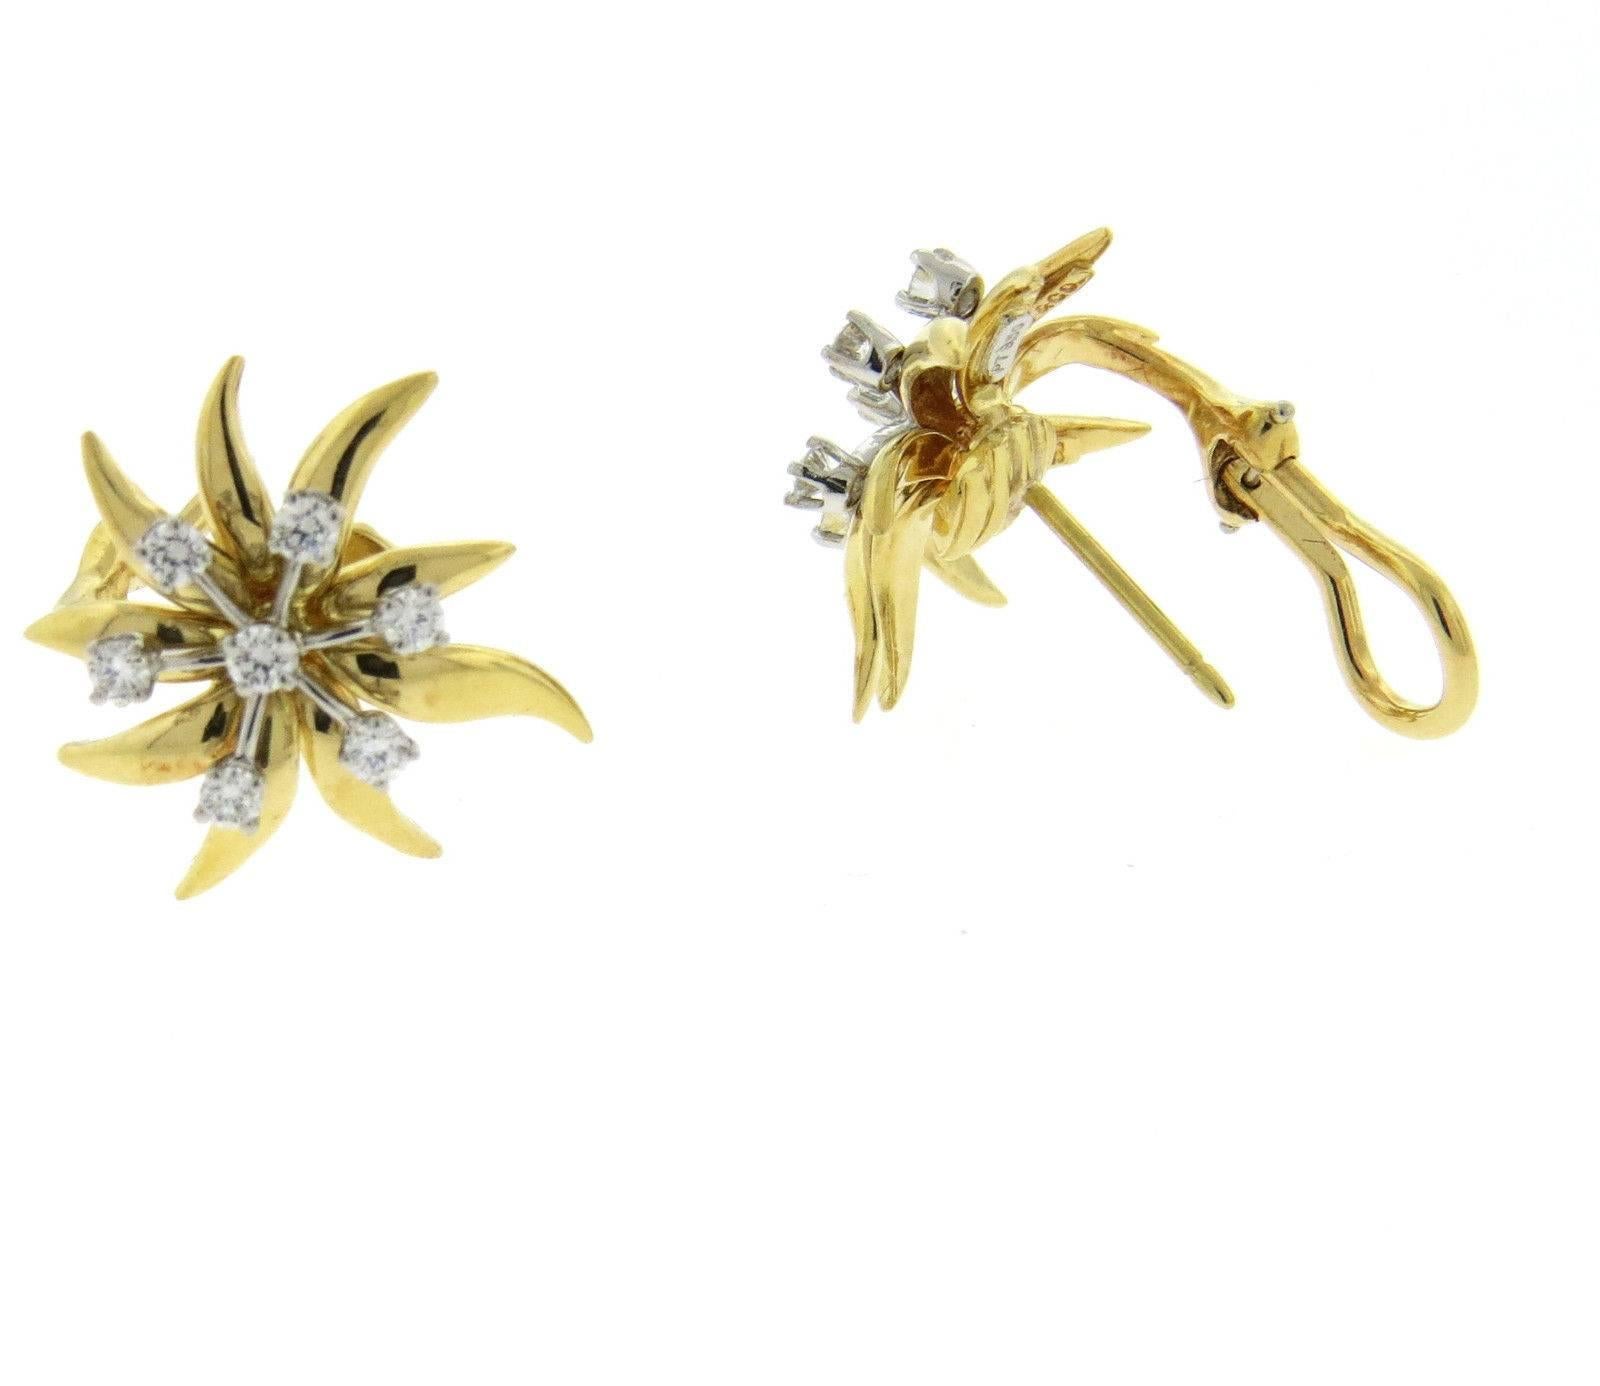 A pair of 18k yellow gold and platinum earrings set with approximately 0.50ctw of G/VS diamonds.  The earrings are 18mm x 20mm and weigh 9.1 grams. Marked: Tiffany & Co, 750, Schlumberger, pt950.  Retail Replacement Value is $5800